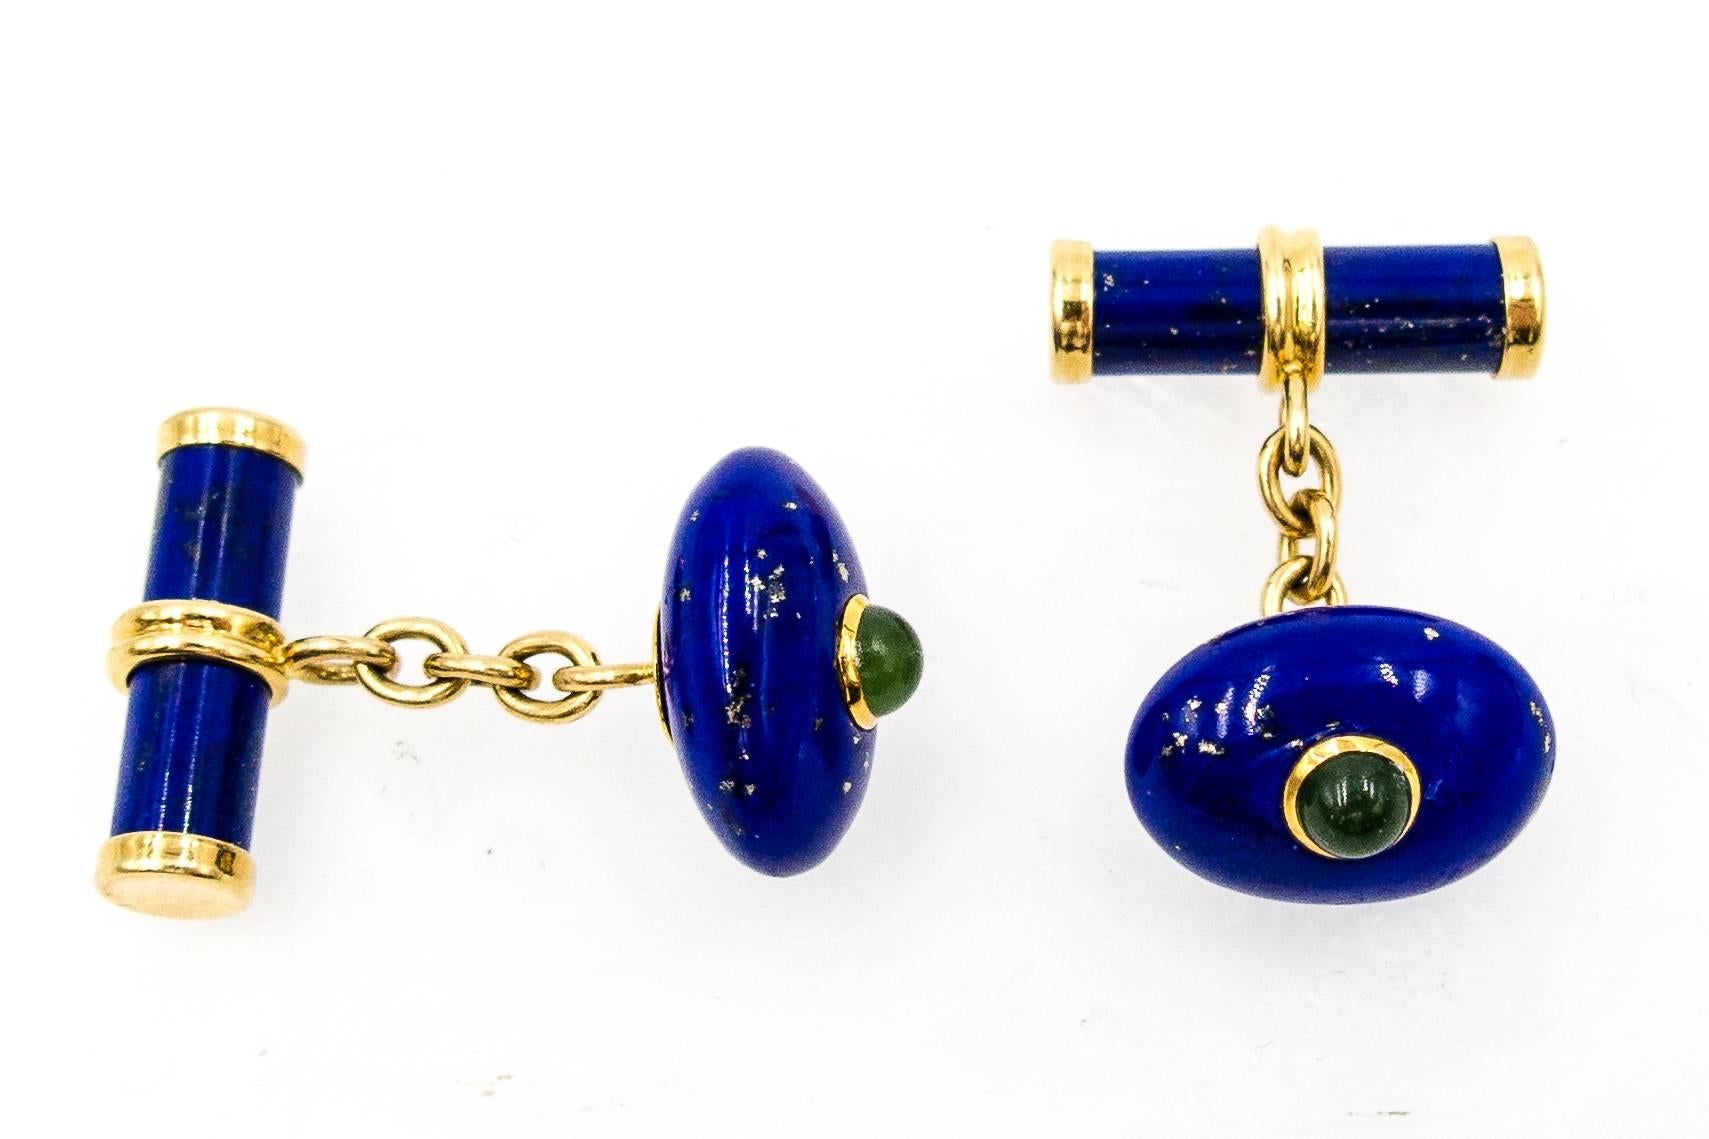 Beautifully crafted and wearable lapis cufflinks topped with a cabochon of nephrite jade.   Set in heavy 18 karat highly polished yellow gold, the deep and rich blue of the lapis shows flecks of hematite throughout.   Marked 